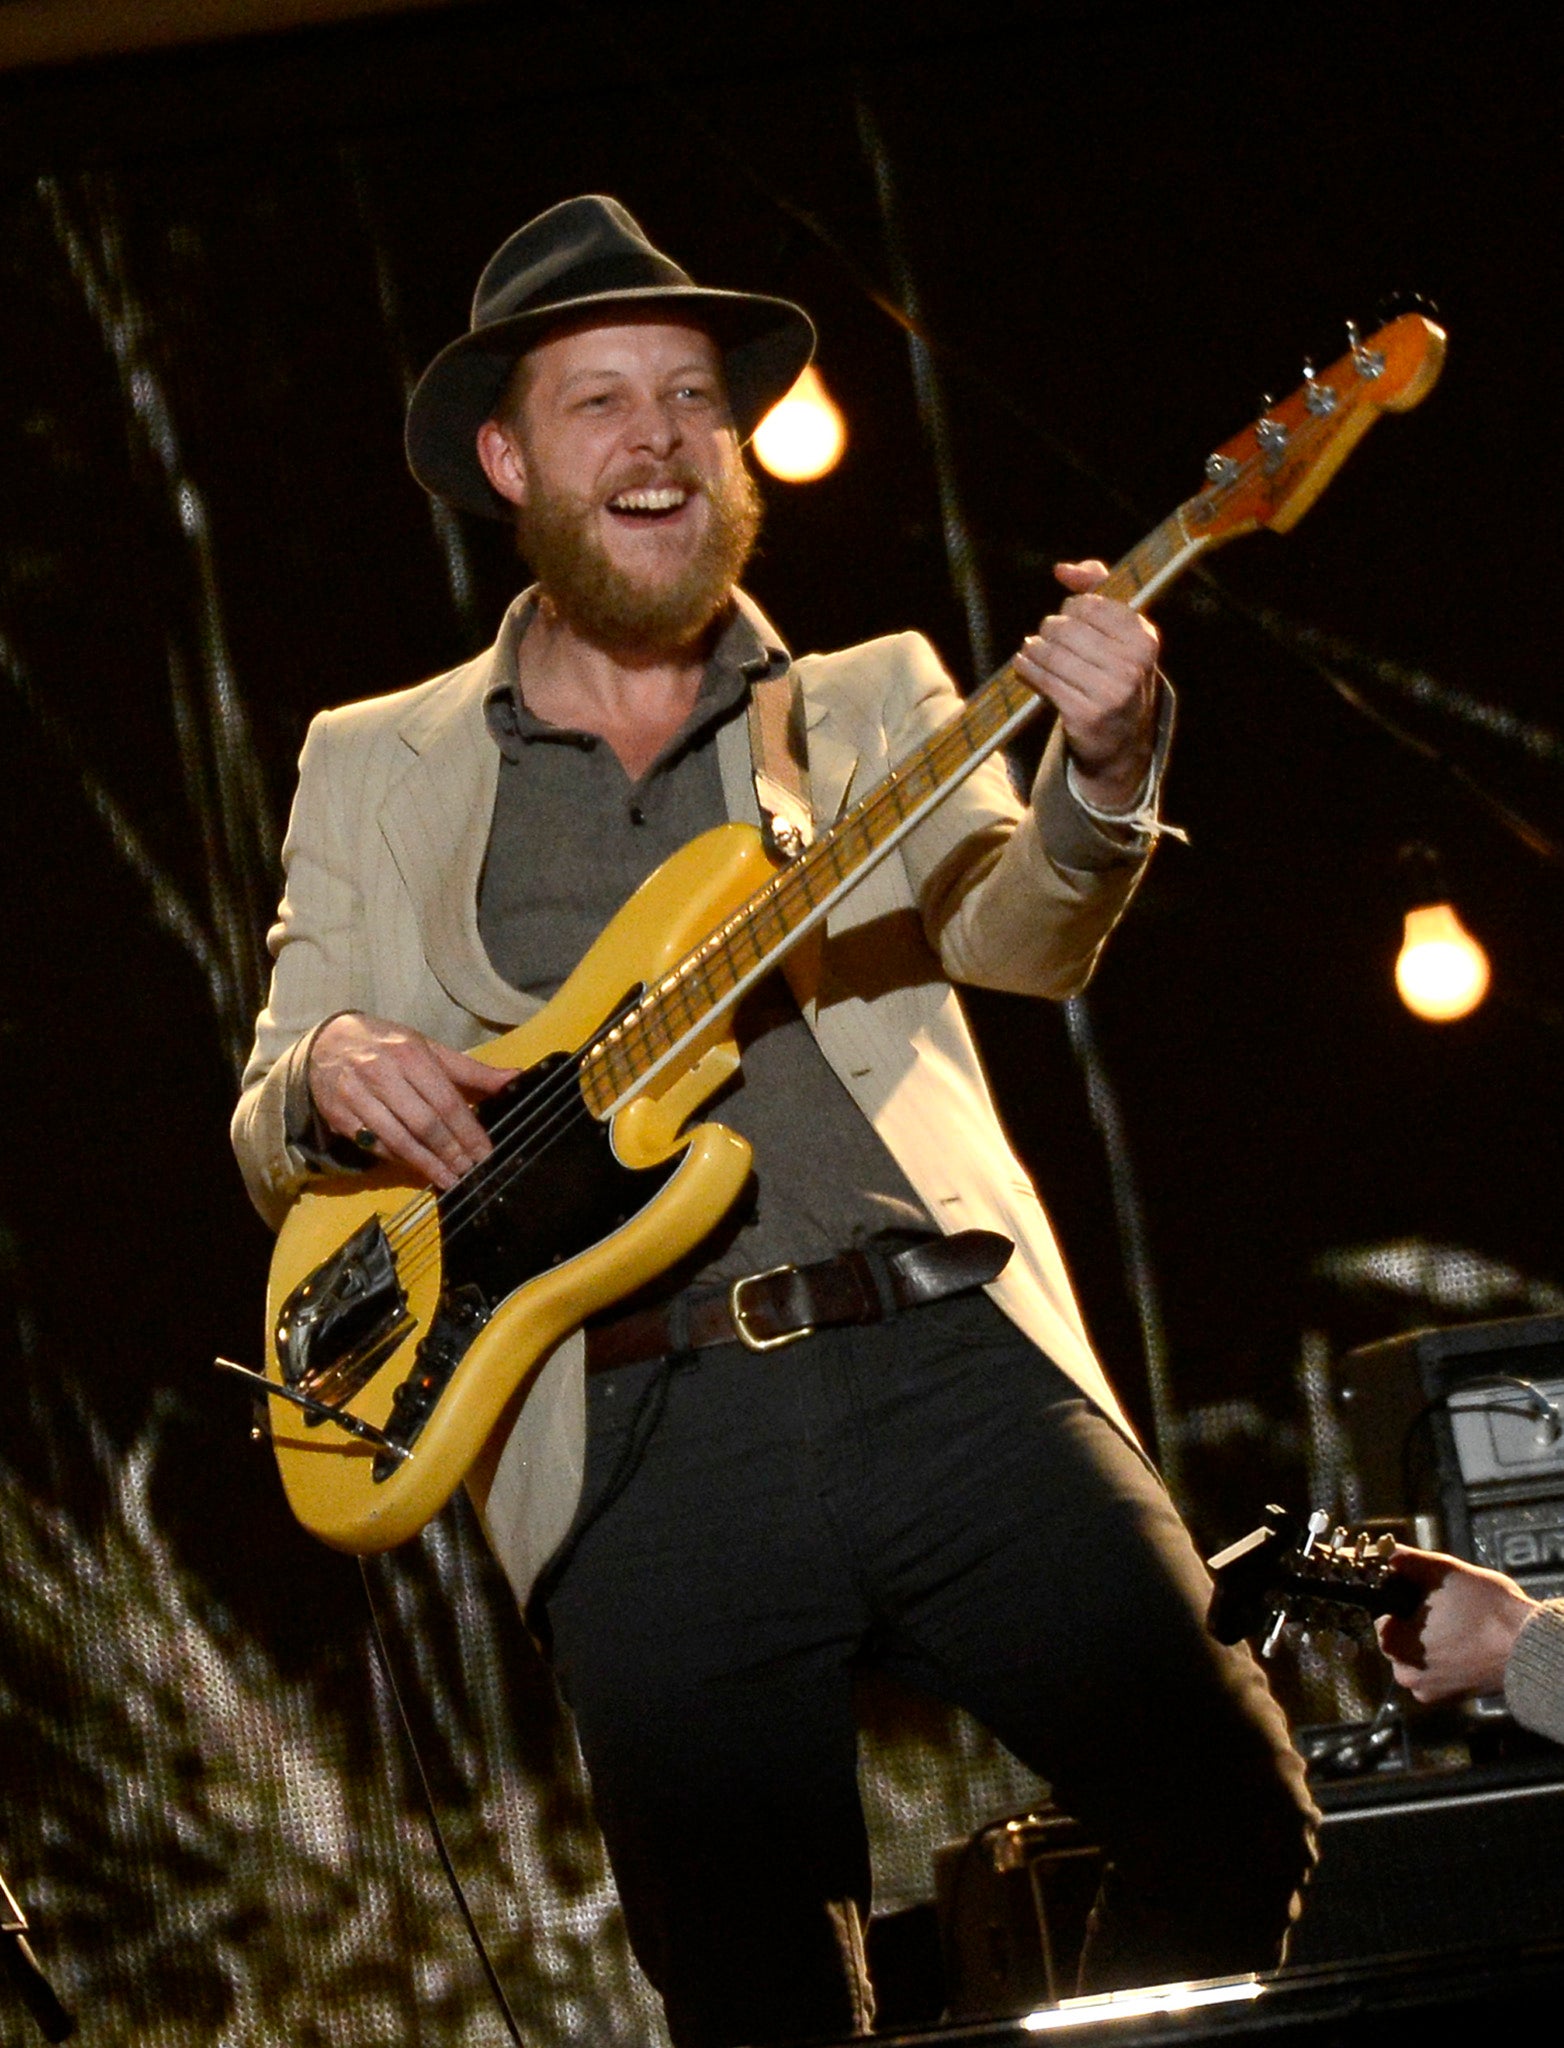 Mumford & Sons bassist Ted Dwane is out of hospital after being treated for a blood clot